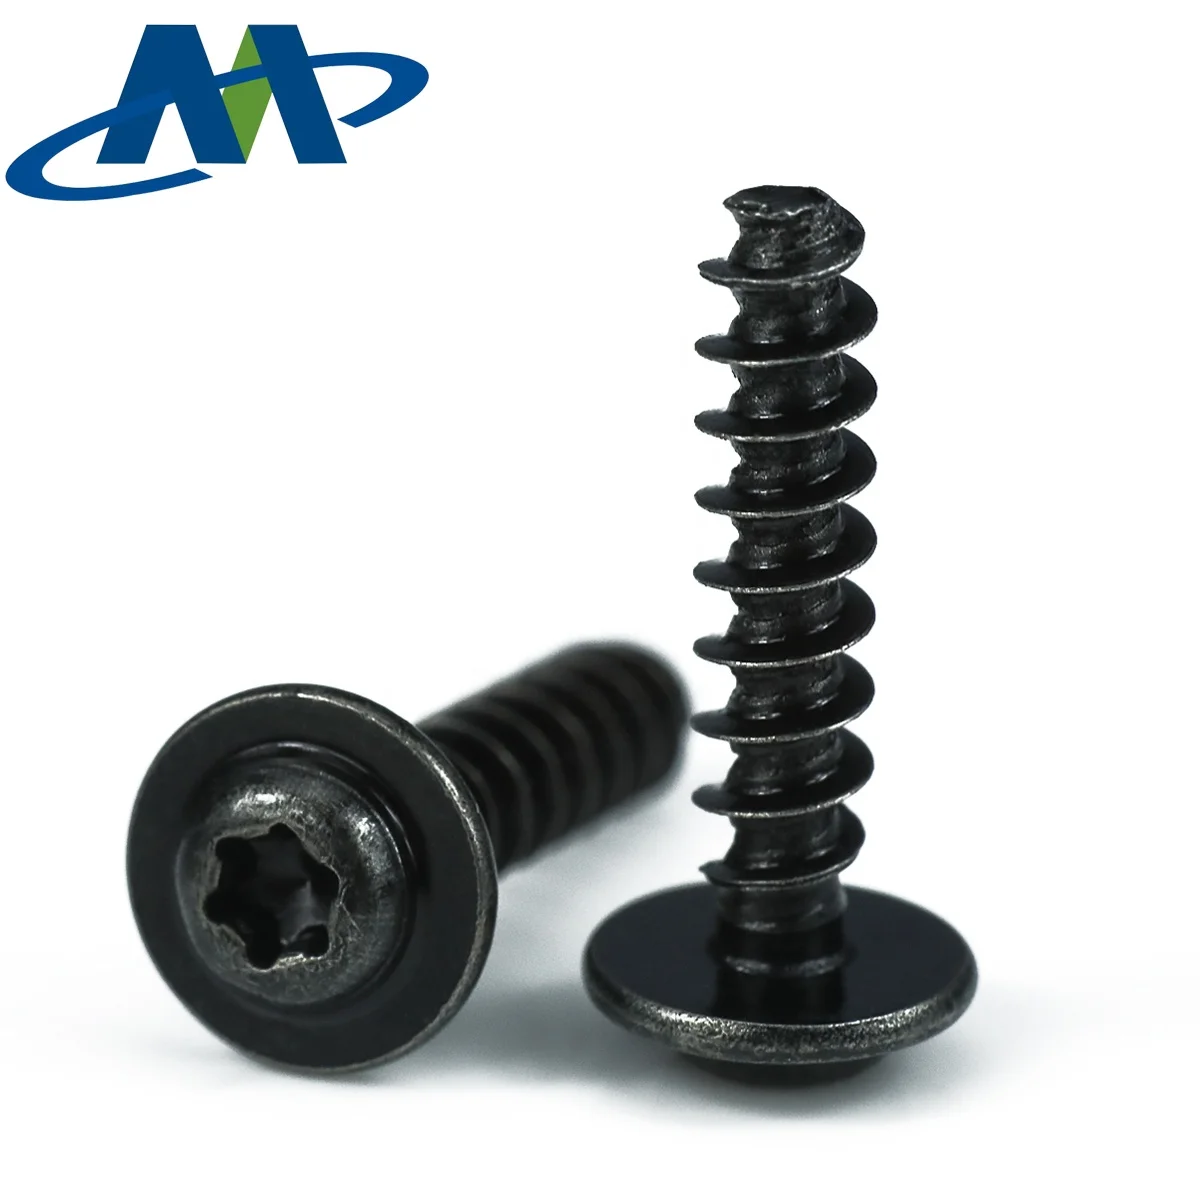 M5 1 8 Pt Thread Forming Screw For Plastics Stainless Steel Wn1411 Pt 